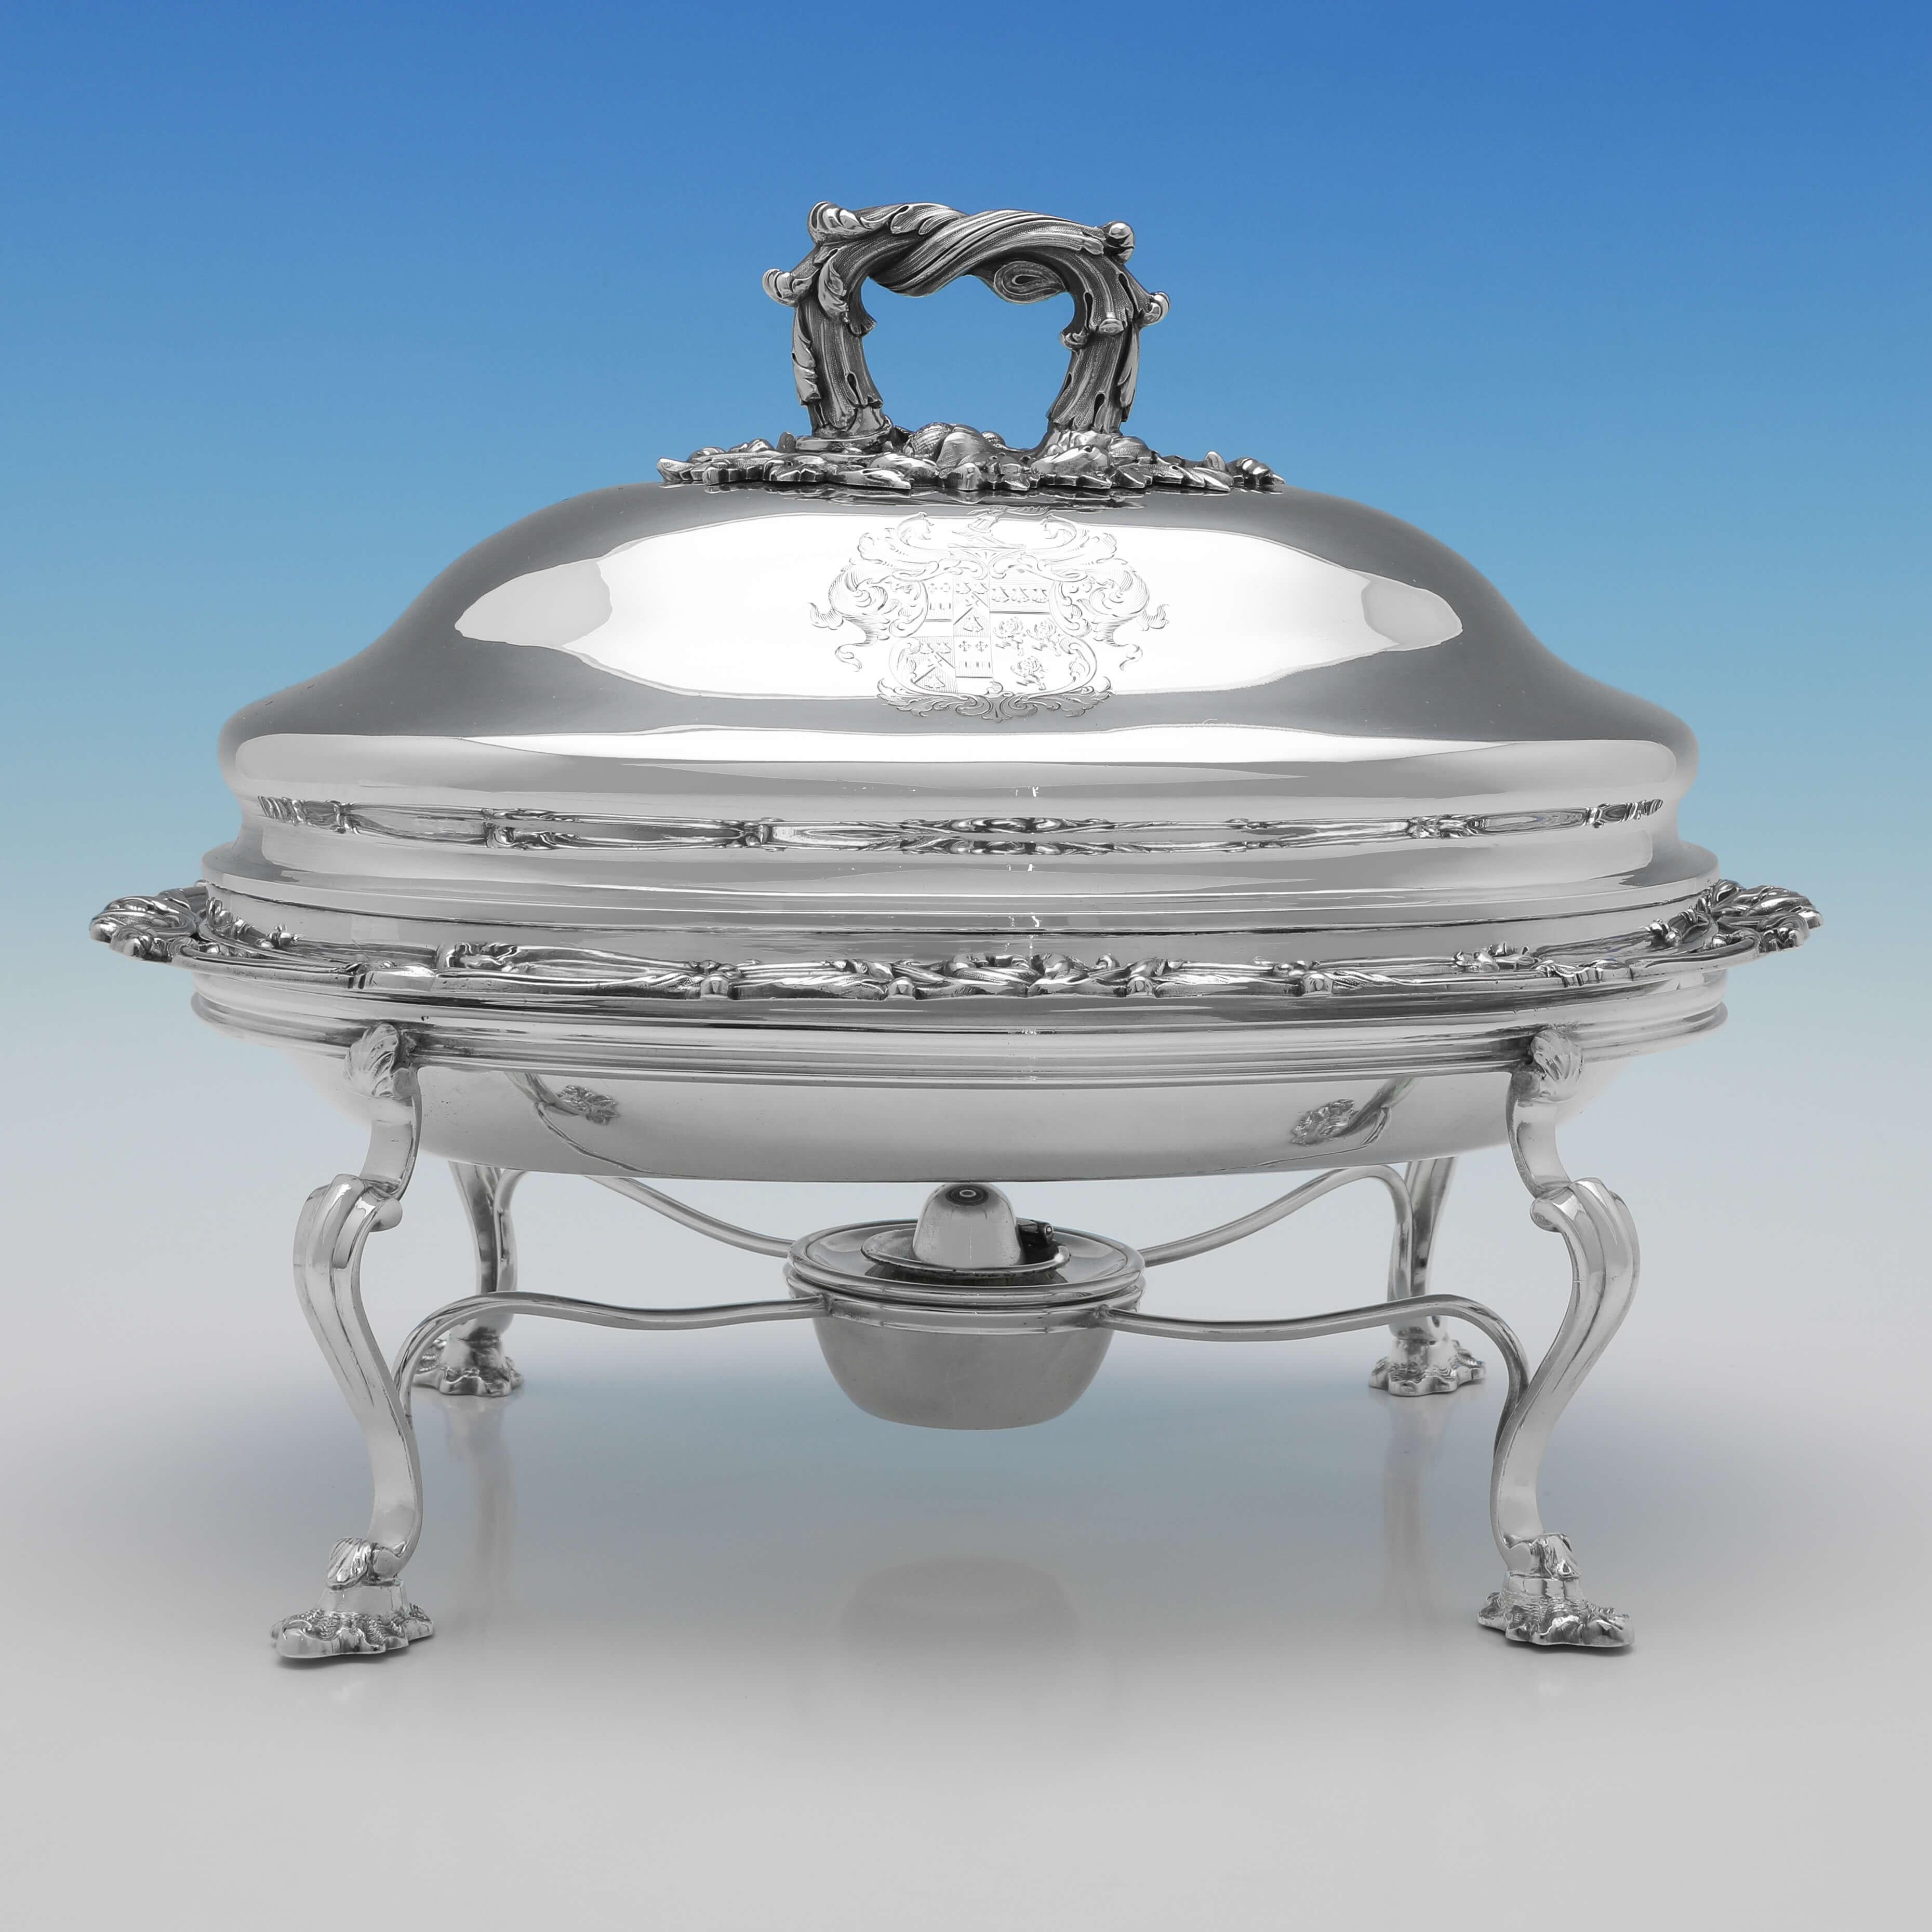 Hallmarked in London in 1830 by Robert Hennell II, this wonderful Pair of George IV, Antique Sterling Silver Entree Dishes on silver plated stands, are generously sized with tall domed lids, and feature acanthus decoration to the border and handle,